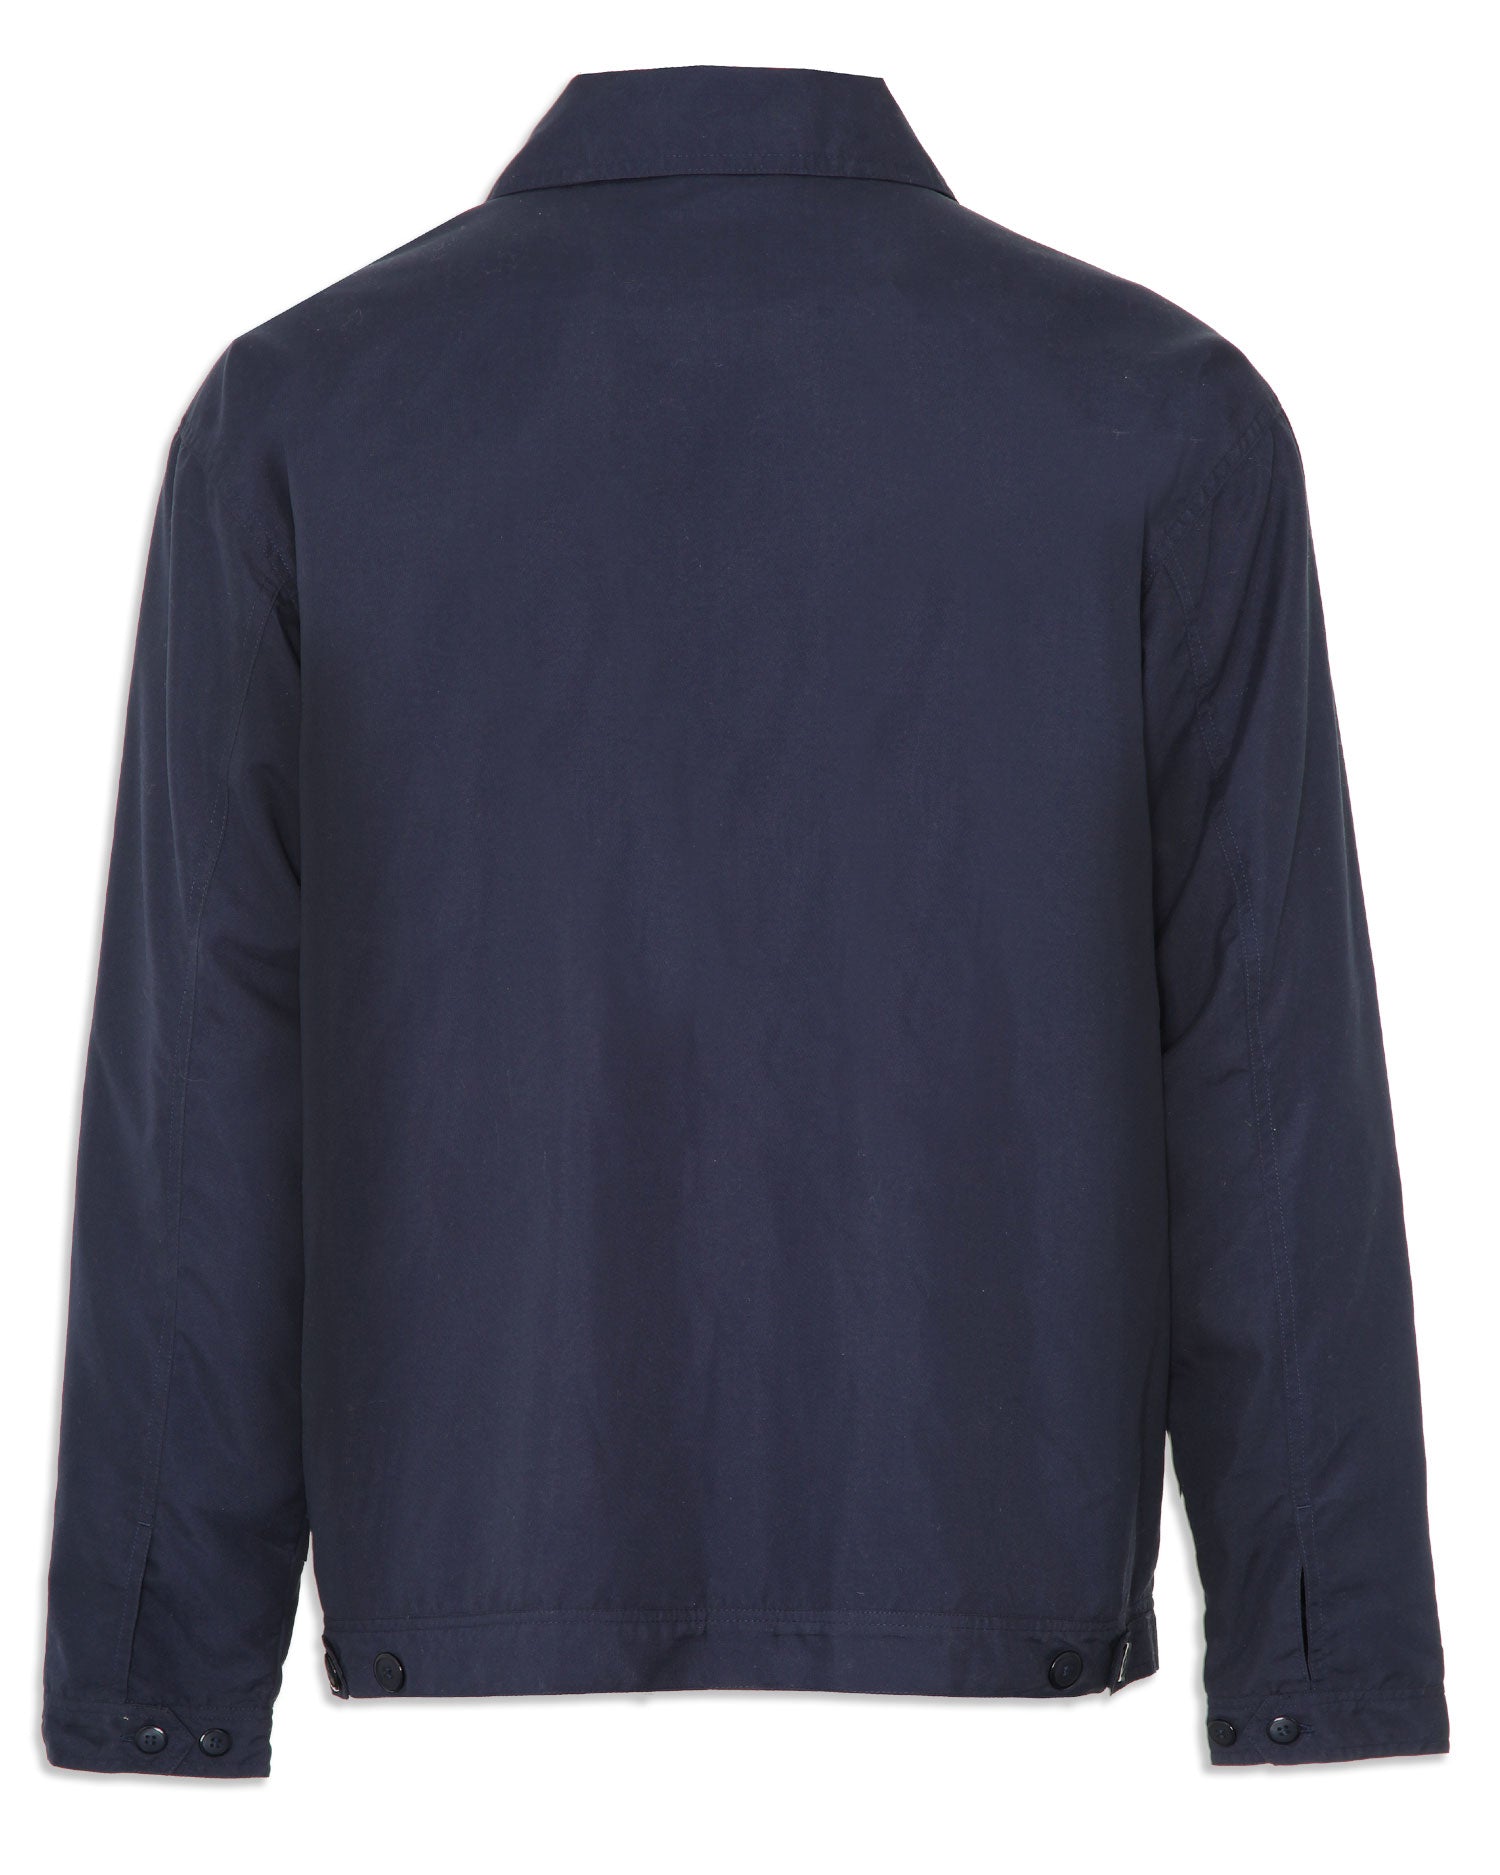 Champion birkdale jacket in navy with zip front,